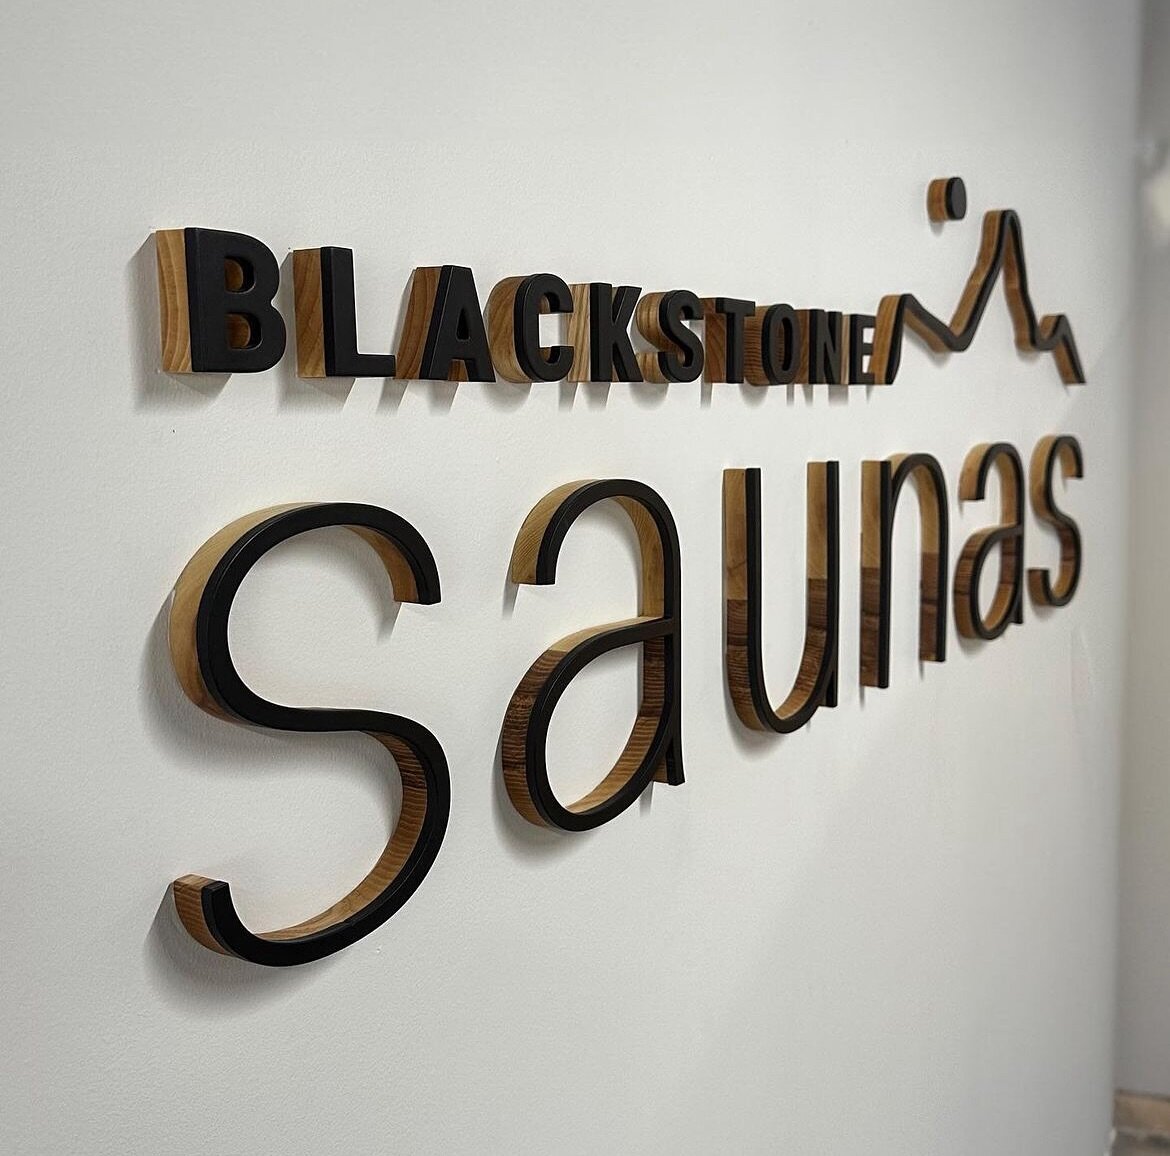 Thank you to @blackstonesaunas for allowing me to create your signage! It&rsquo;s beautiful up on your wall 🥰

#langley #langleybc #langleysigns #blackstonesaunas #vancouvercanada #woodsign #saunas